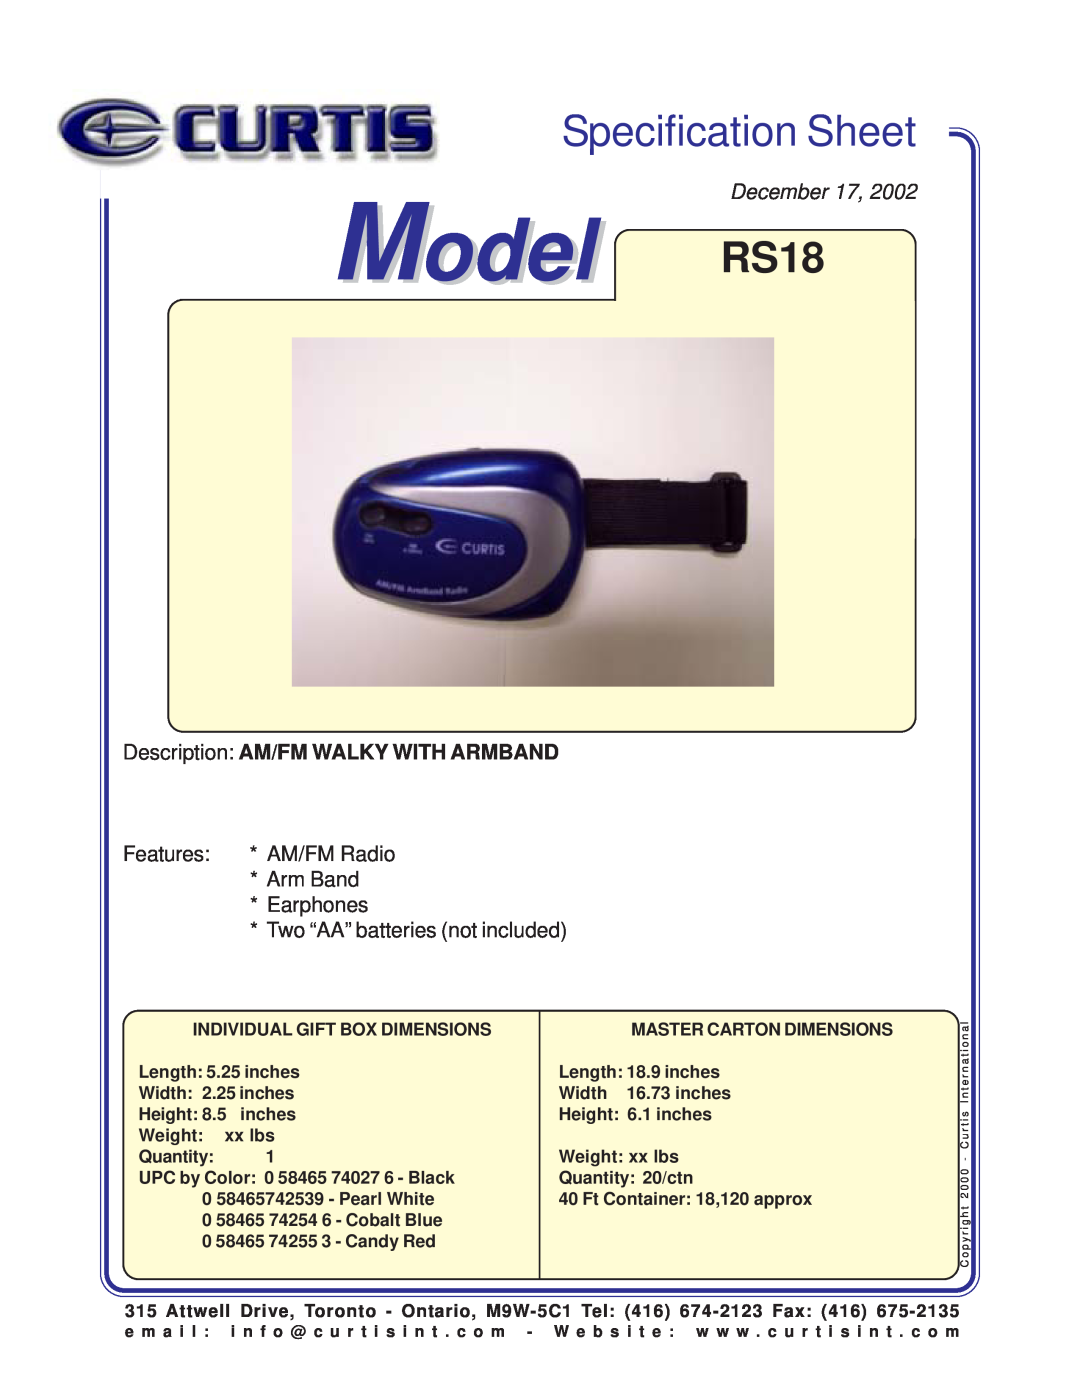 Curtis specifications Model RS18, Specification Sheet, December, Place Image Here, Description AM/FM WALKY WITH ARMBAND 